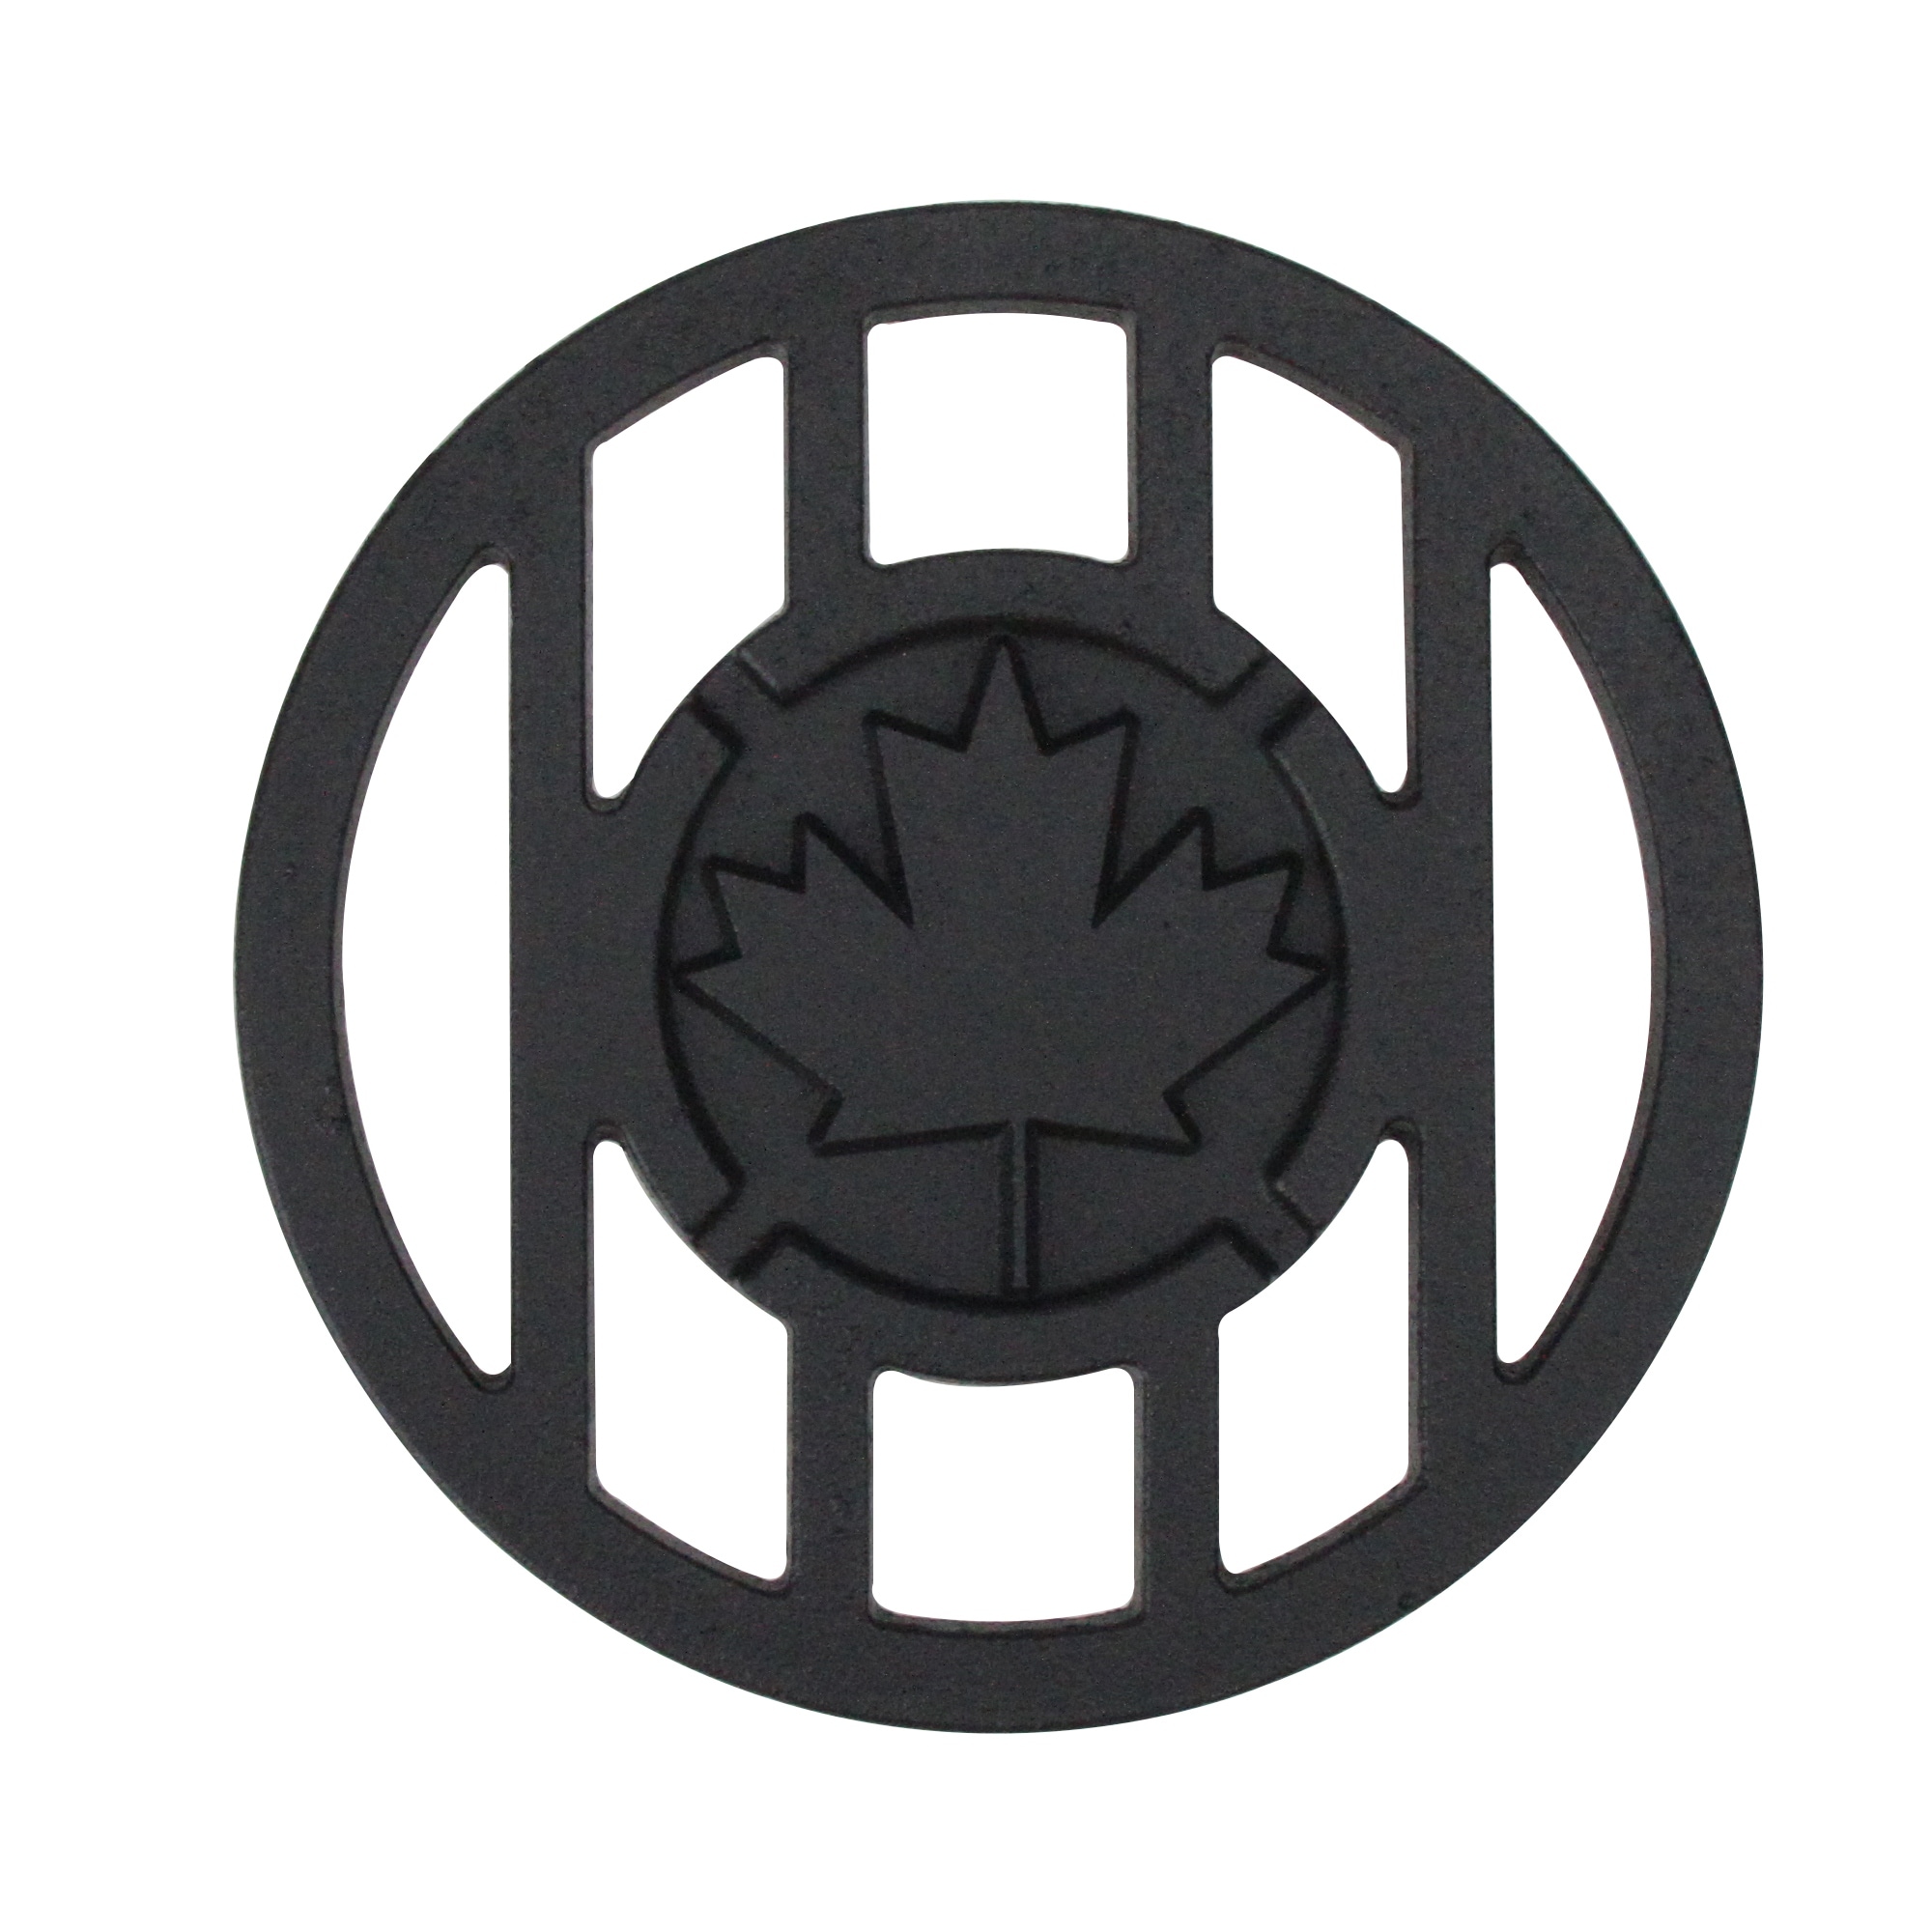 Canada Inspired Maple Leaf Branding Iron Grill Accessory